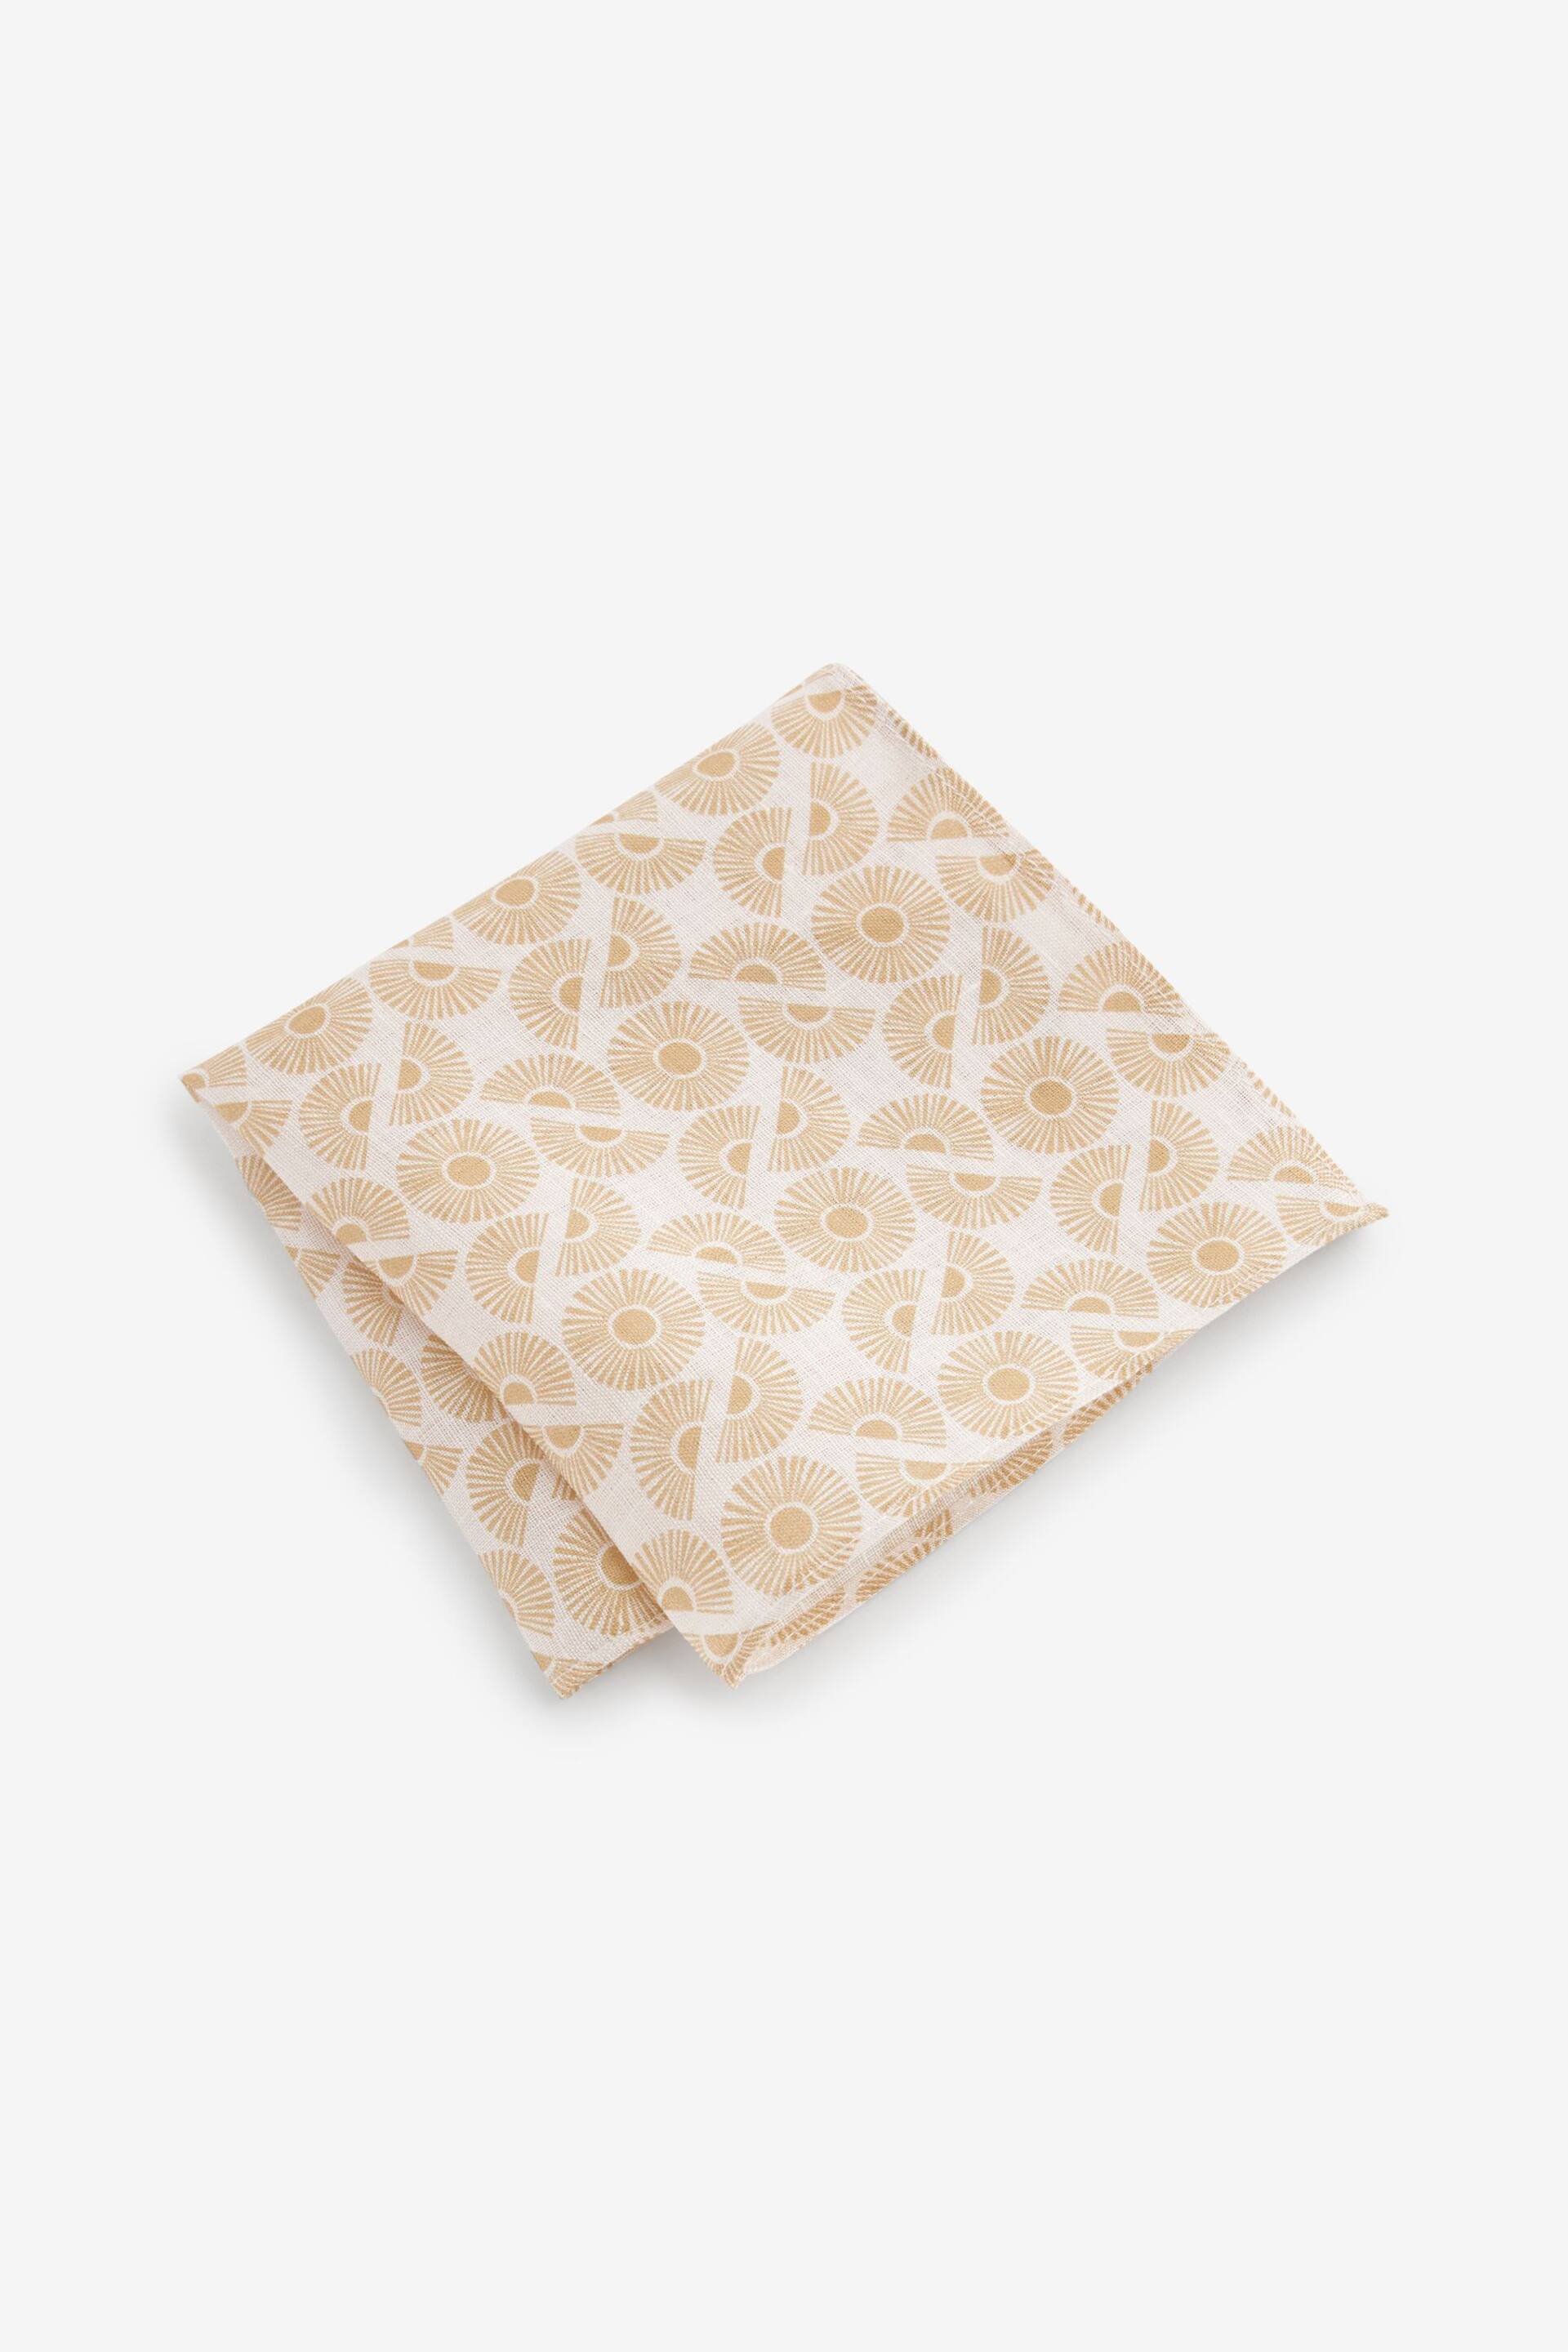 Neutral/Yellow Sun Linen Pocket Square - Image 1 of 2